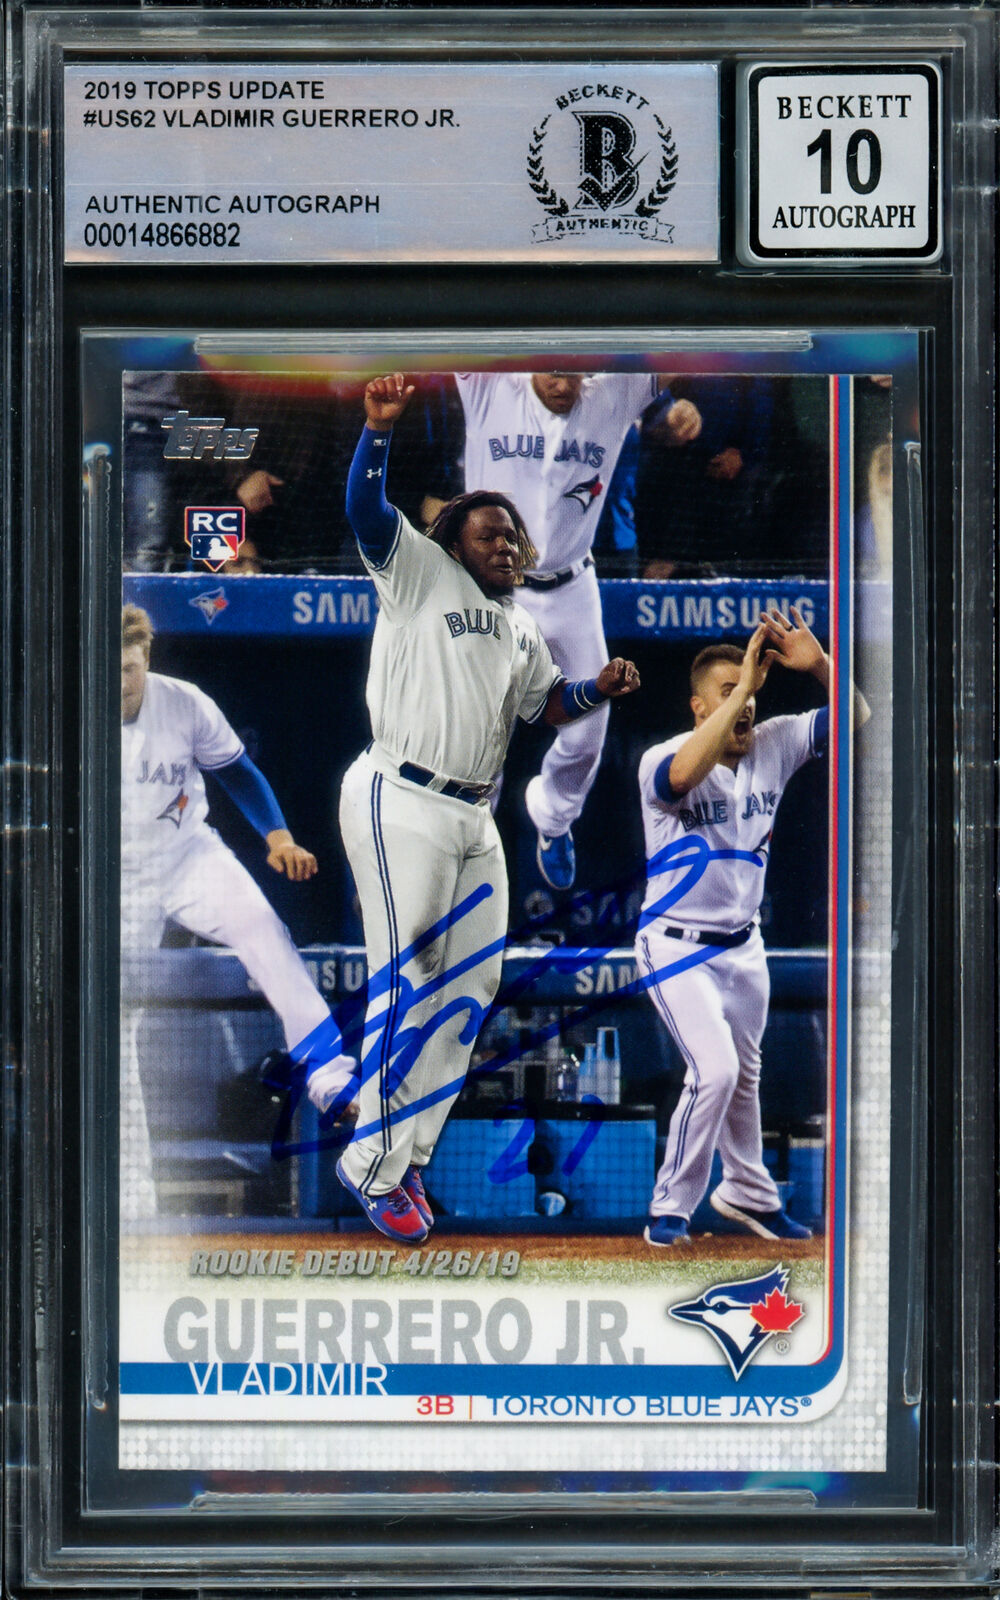  2020 Topps Tier One Relics #T1R-VGJ Vladimir Guerrero Jr. Game  Worn Blue Jays Jersey Baseball Card - Only 395 made! : Collectibles & Fine  Art